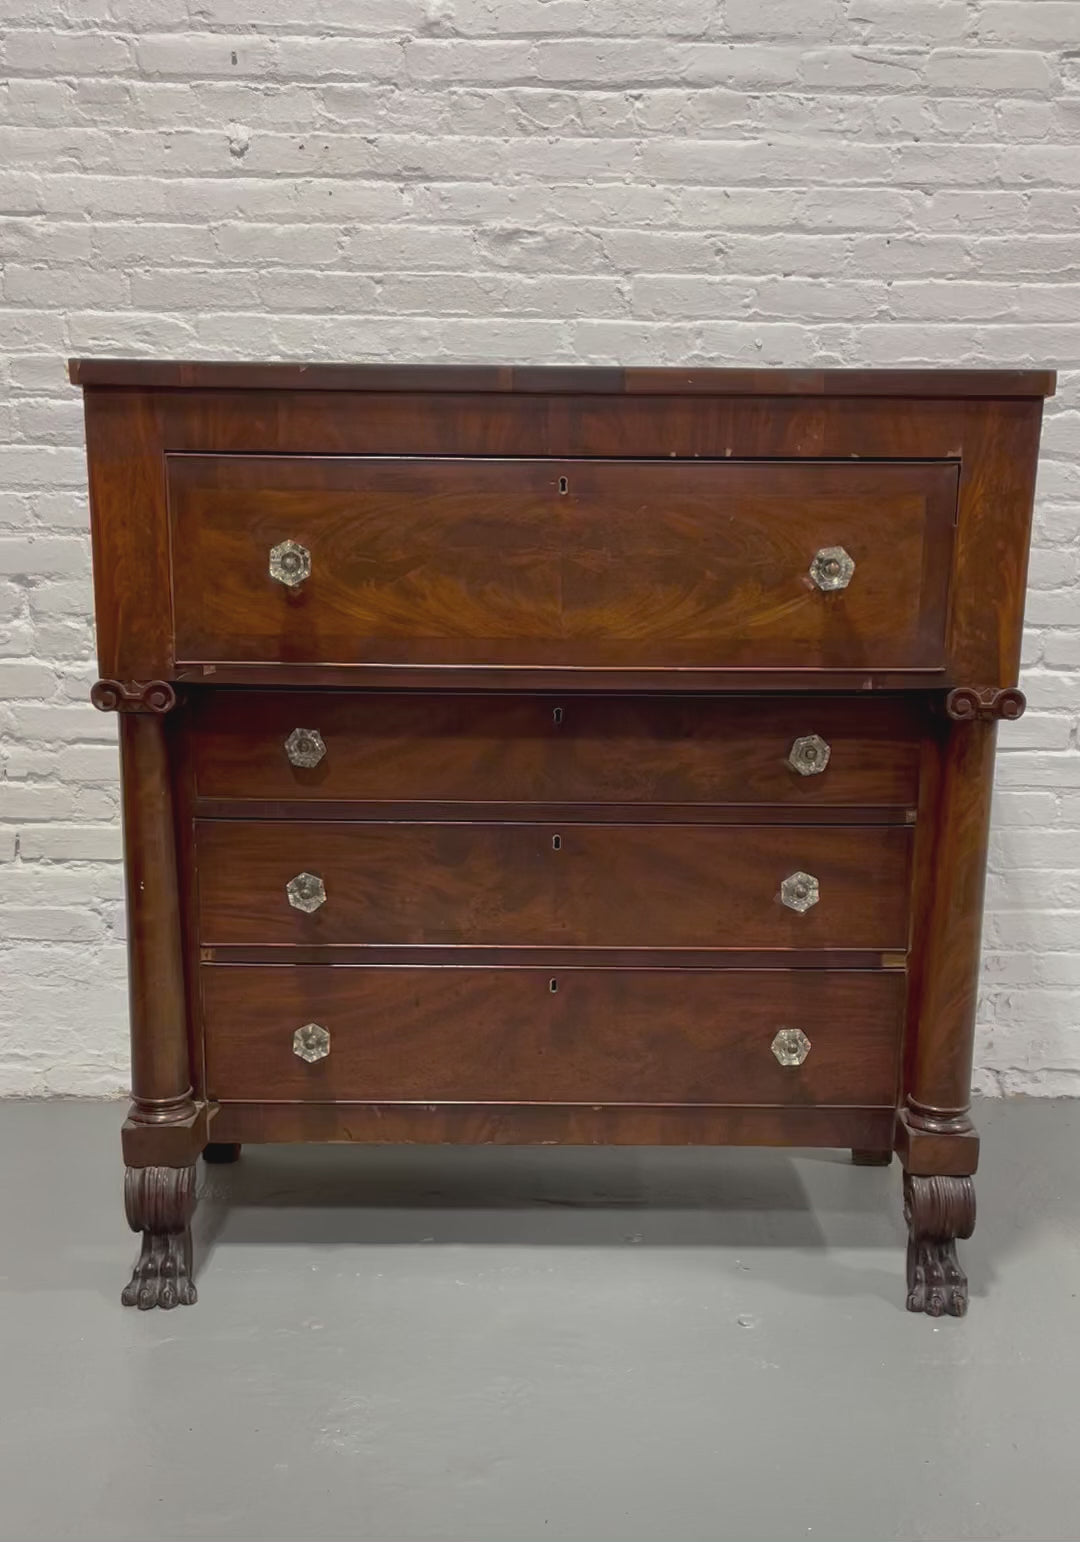 Antique Empire Period Mahogany Chest of Drawers, c. 1850’s